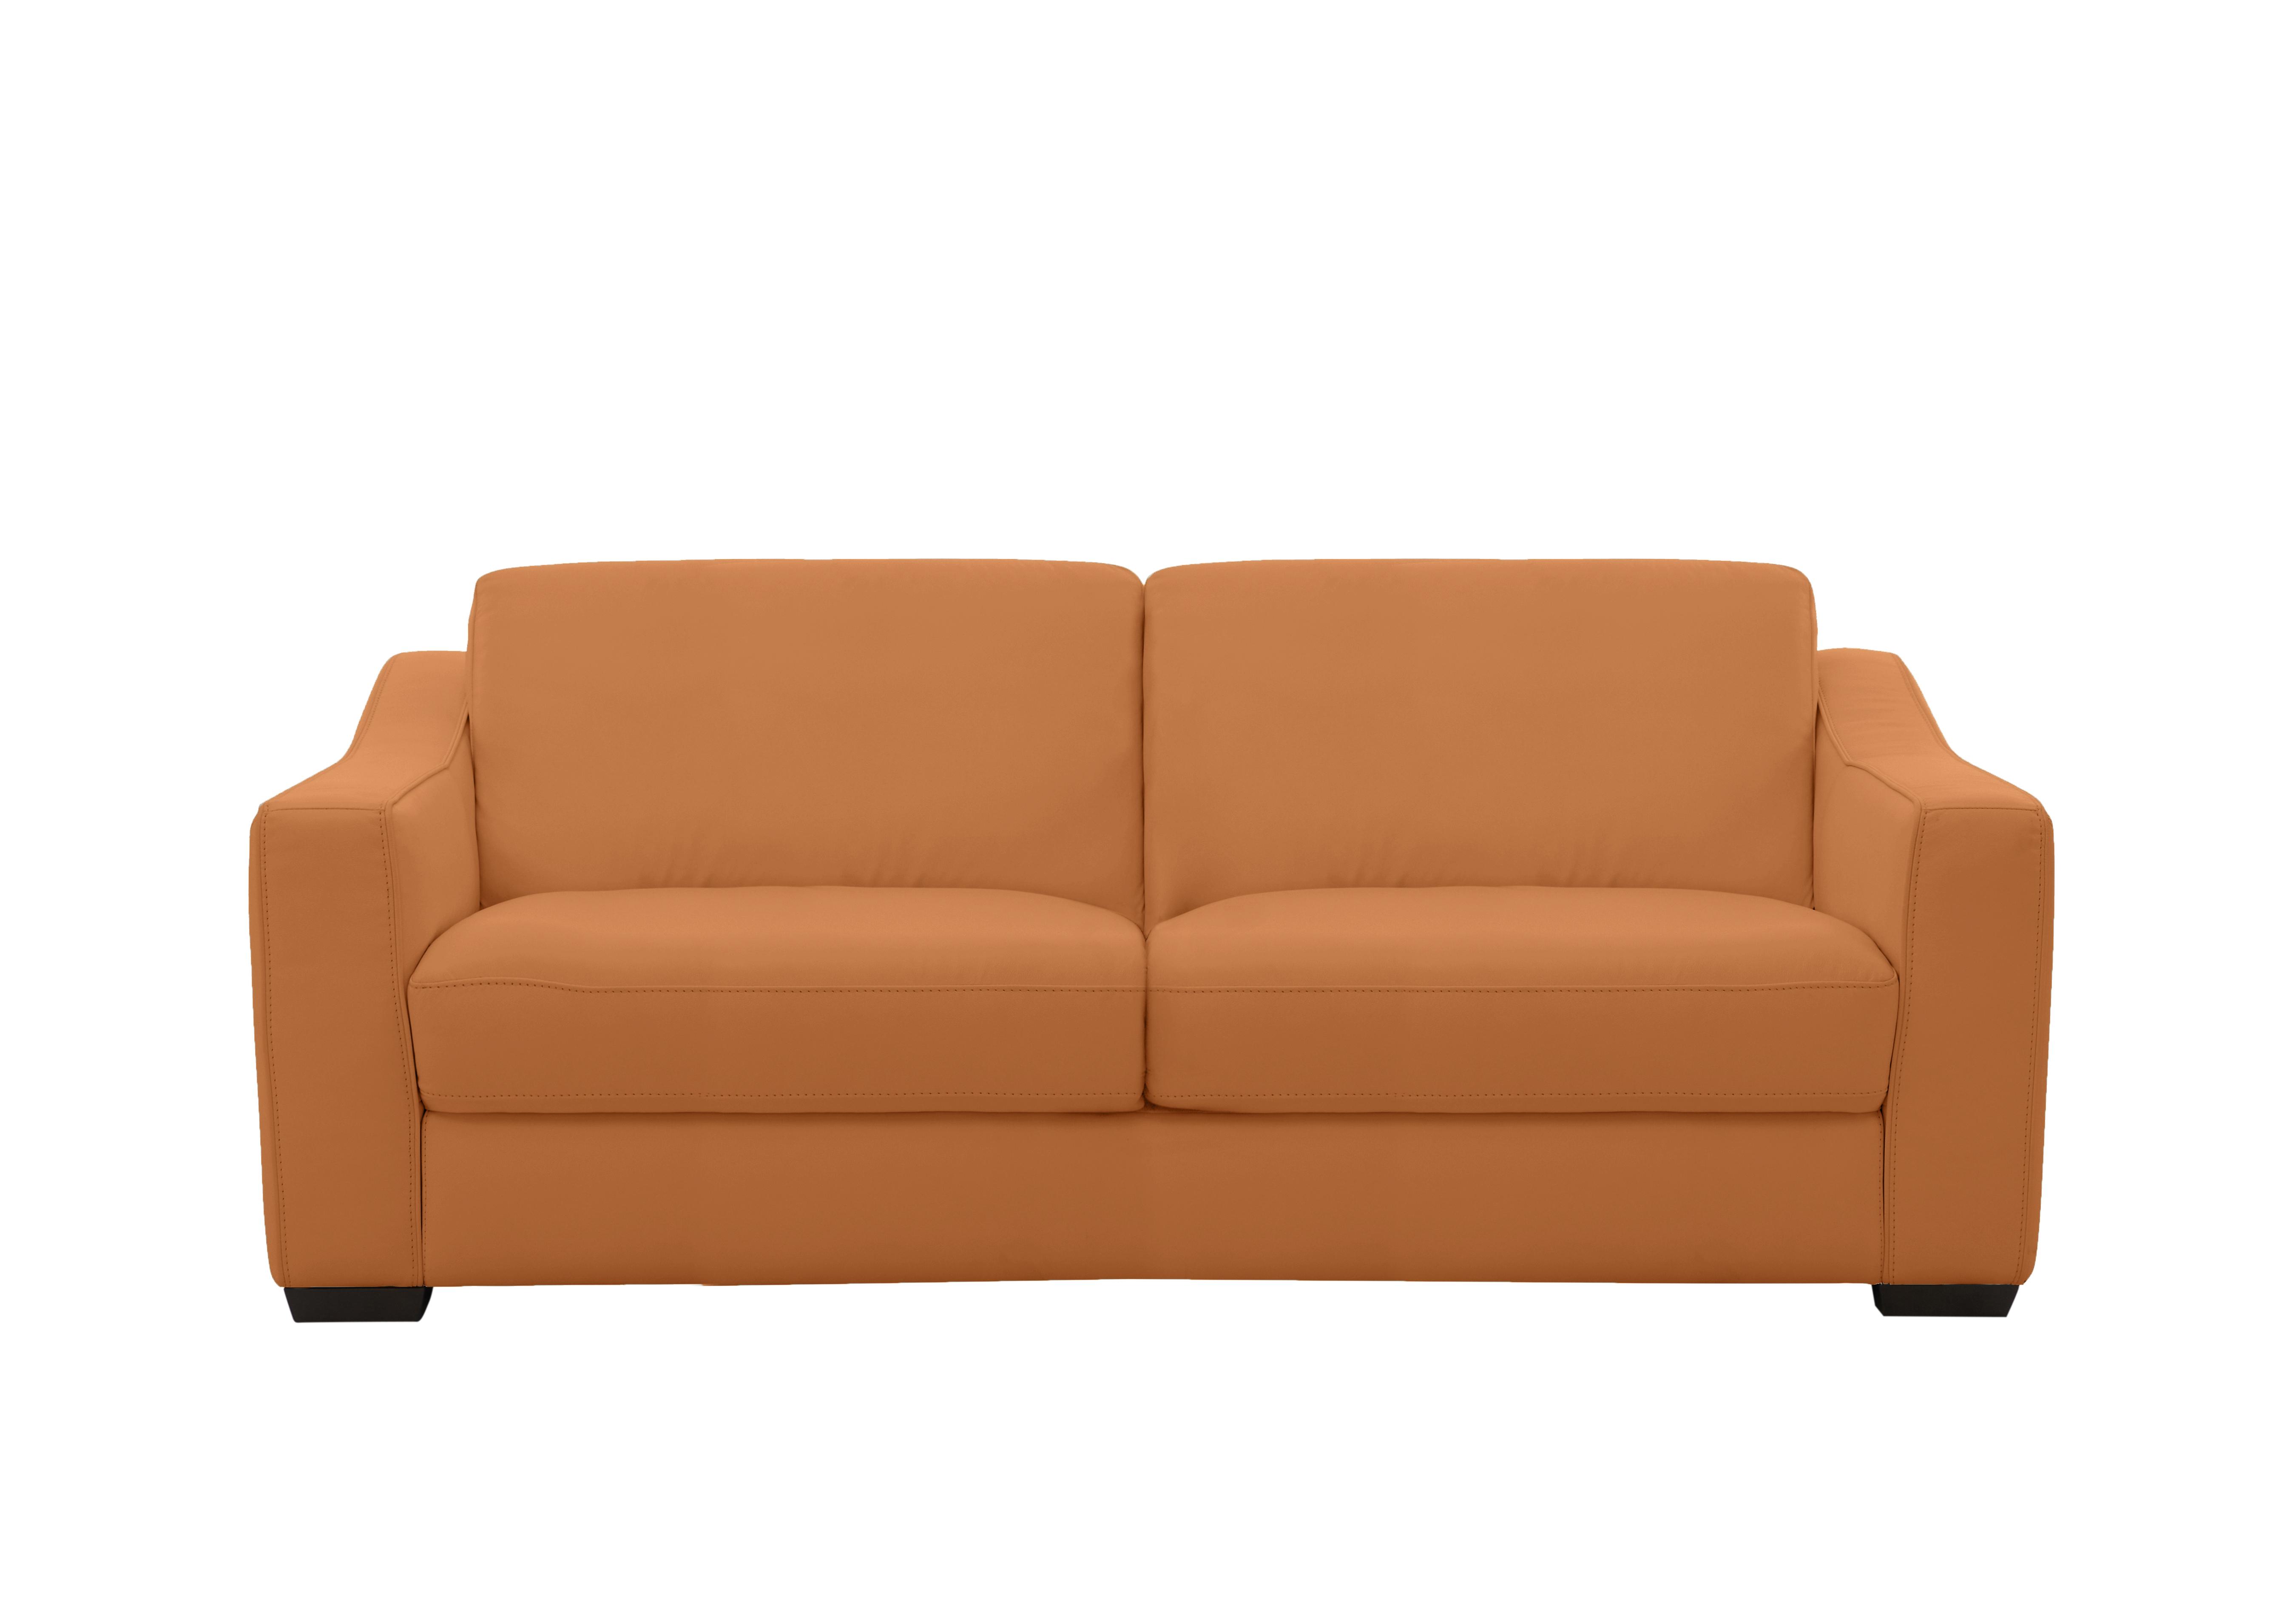 Optimus 3 Seater Leather Sofa in Bv-335e Honey Yellow on Furniture Village